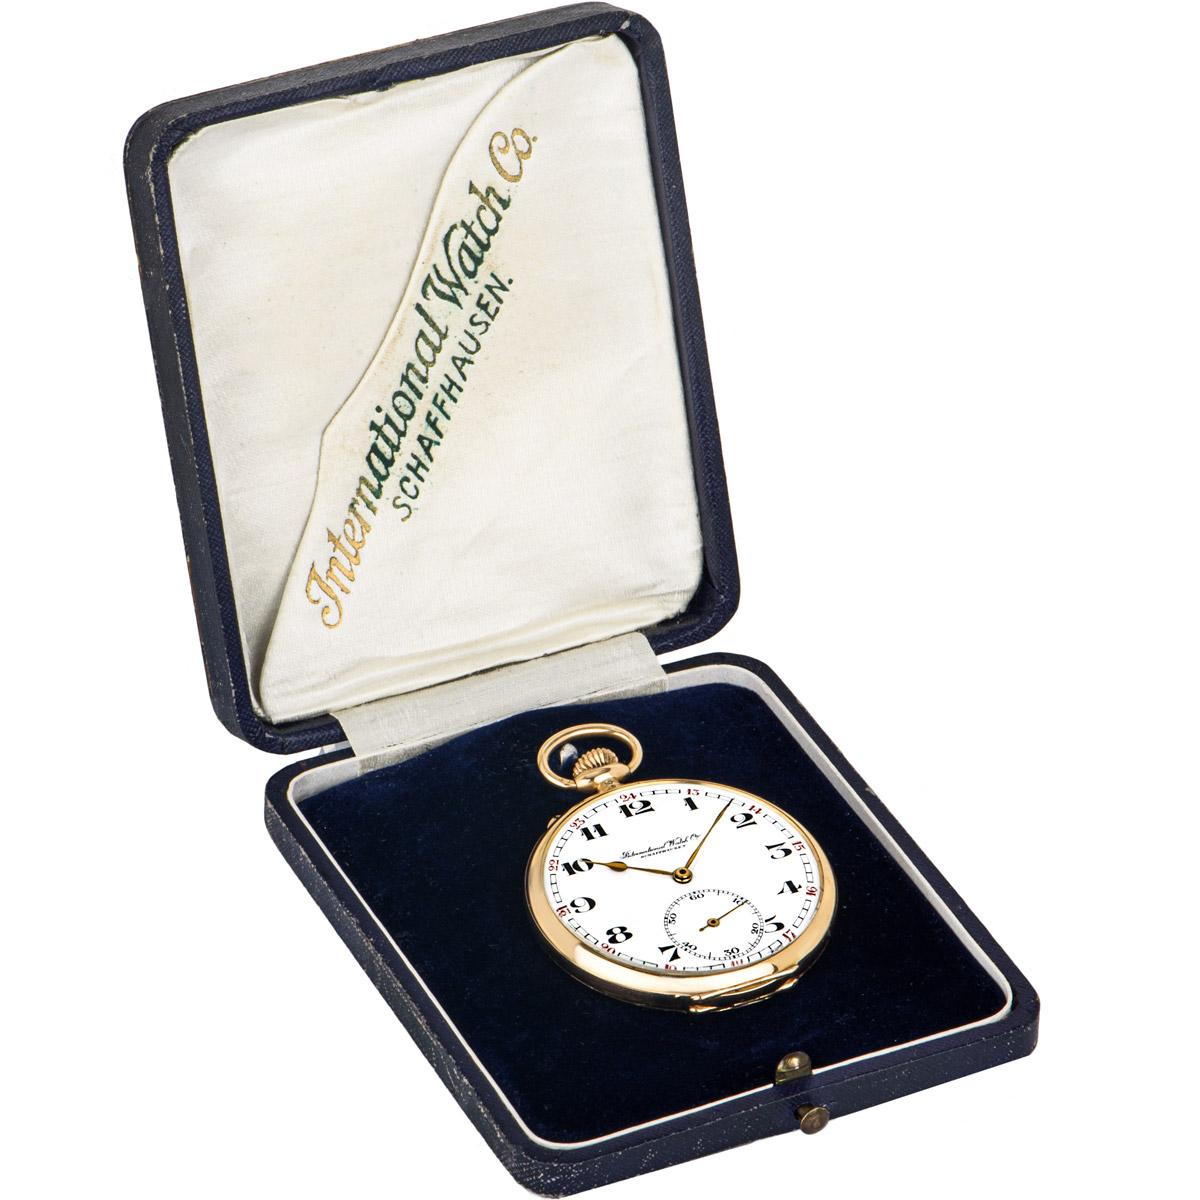 International Watch Company Gold Keyless Lever Open Face Pocket Watch C1920S For Sale 2